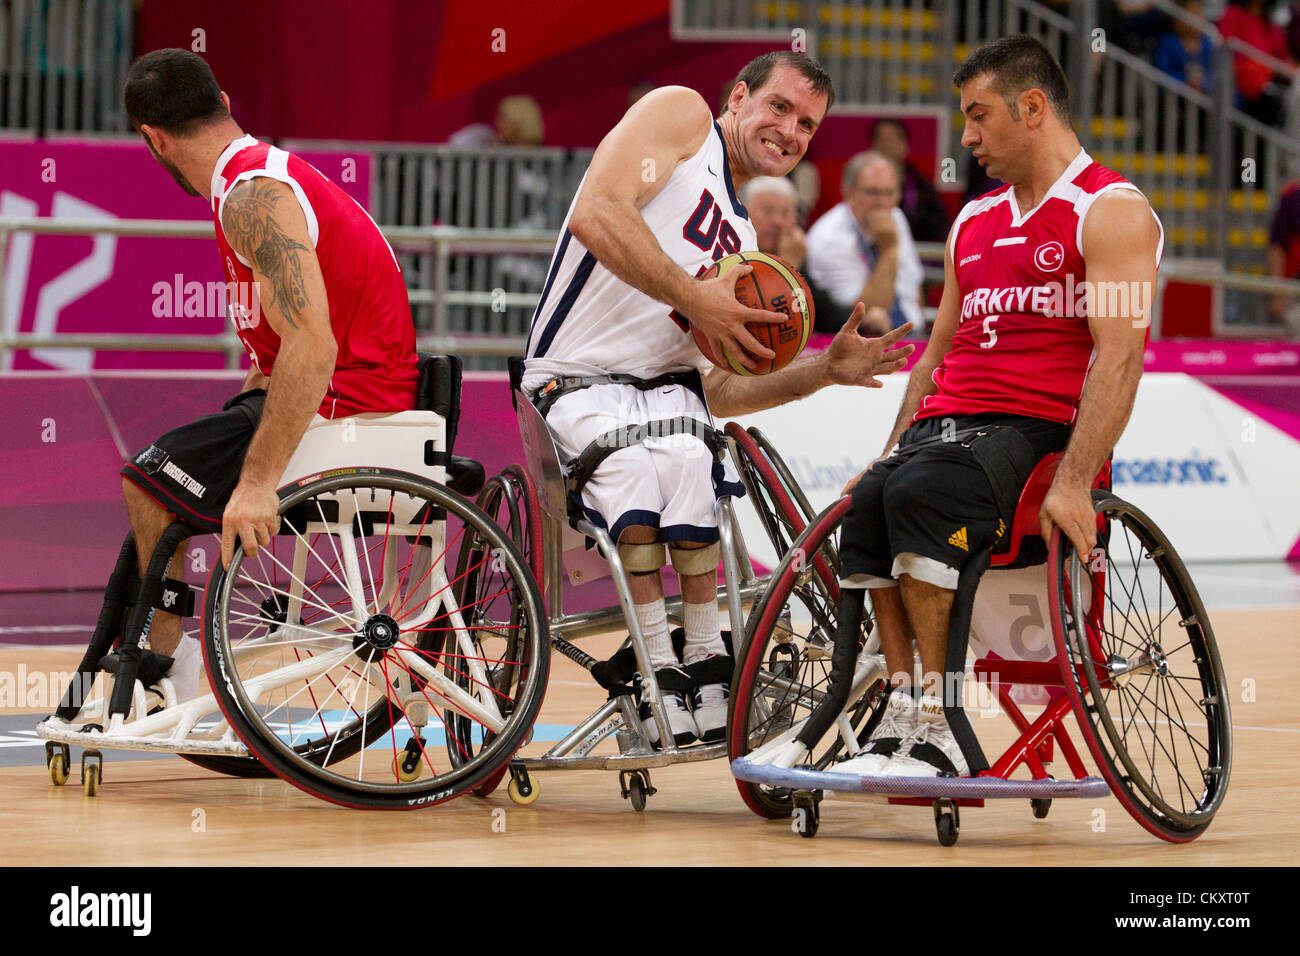 USA's Joshua Turek squeezes between two Turkish players during wheelchair basketball game at the 2012 London Paralympics. Stock Photo